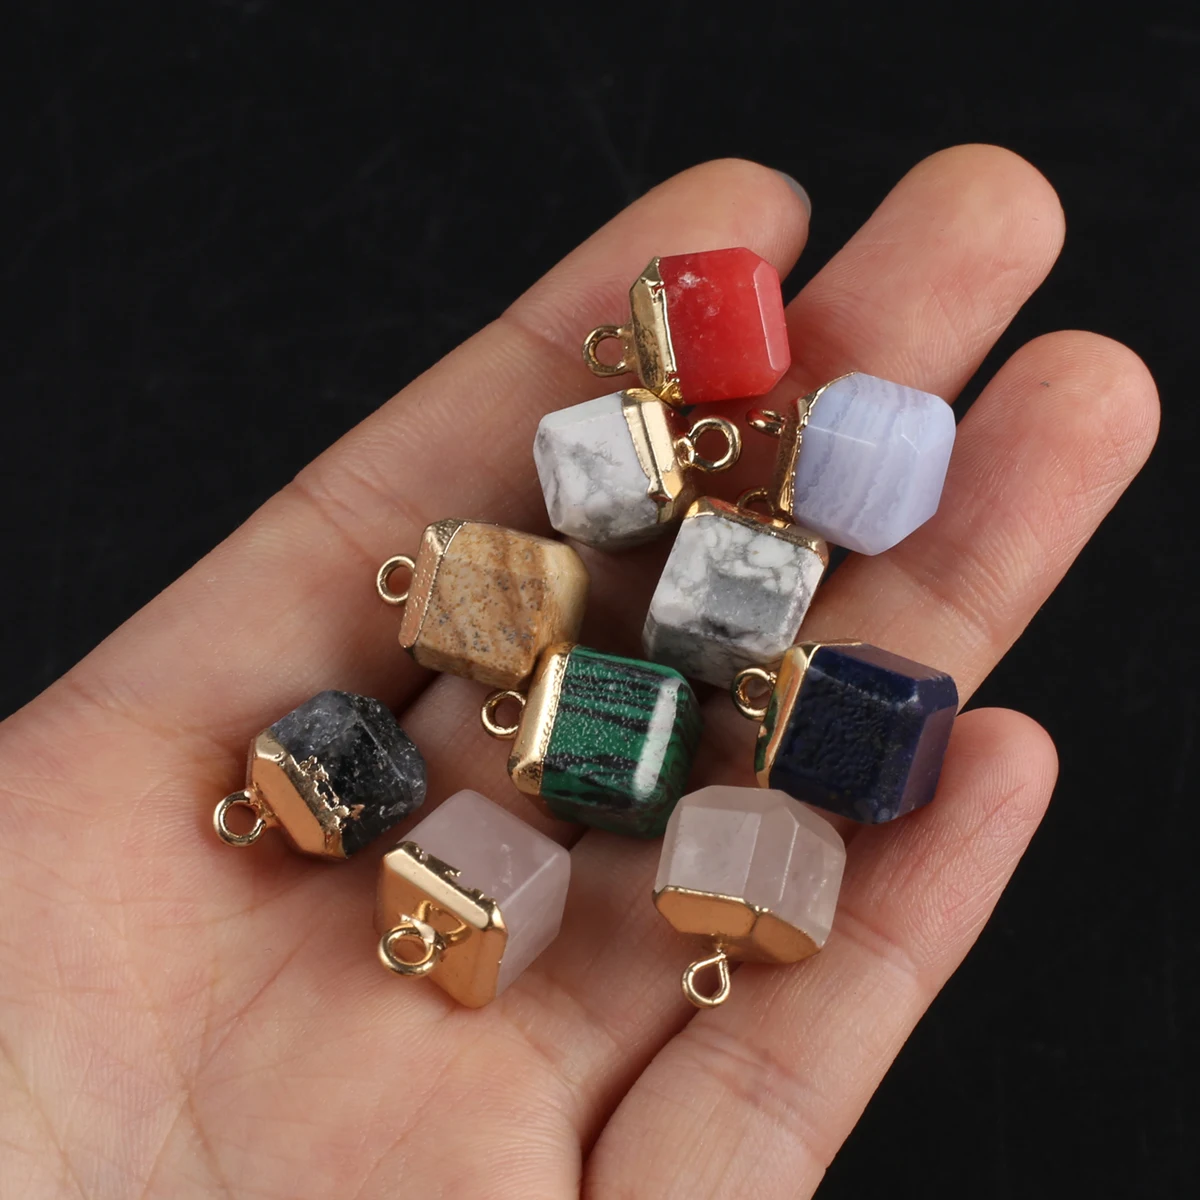 

5pcs Square Pendant Natural Stone Malachite Turquoise Agate Random Color Charms for Jewelry Making DIY Necklace Earrings Charms